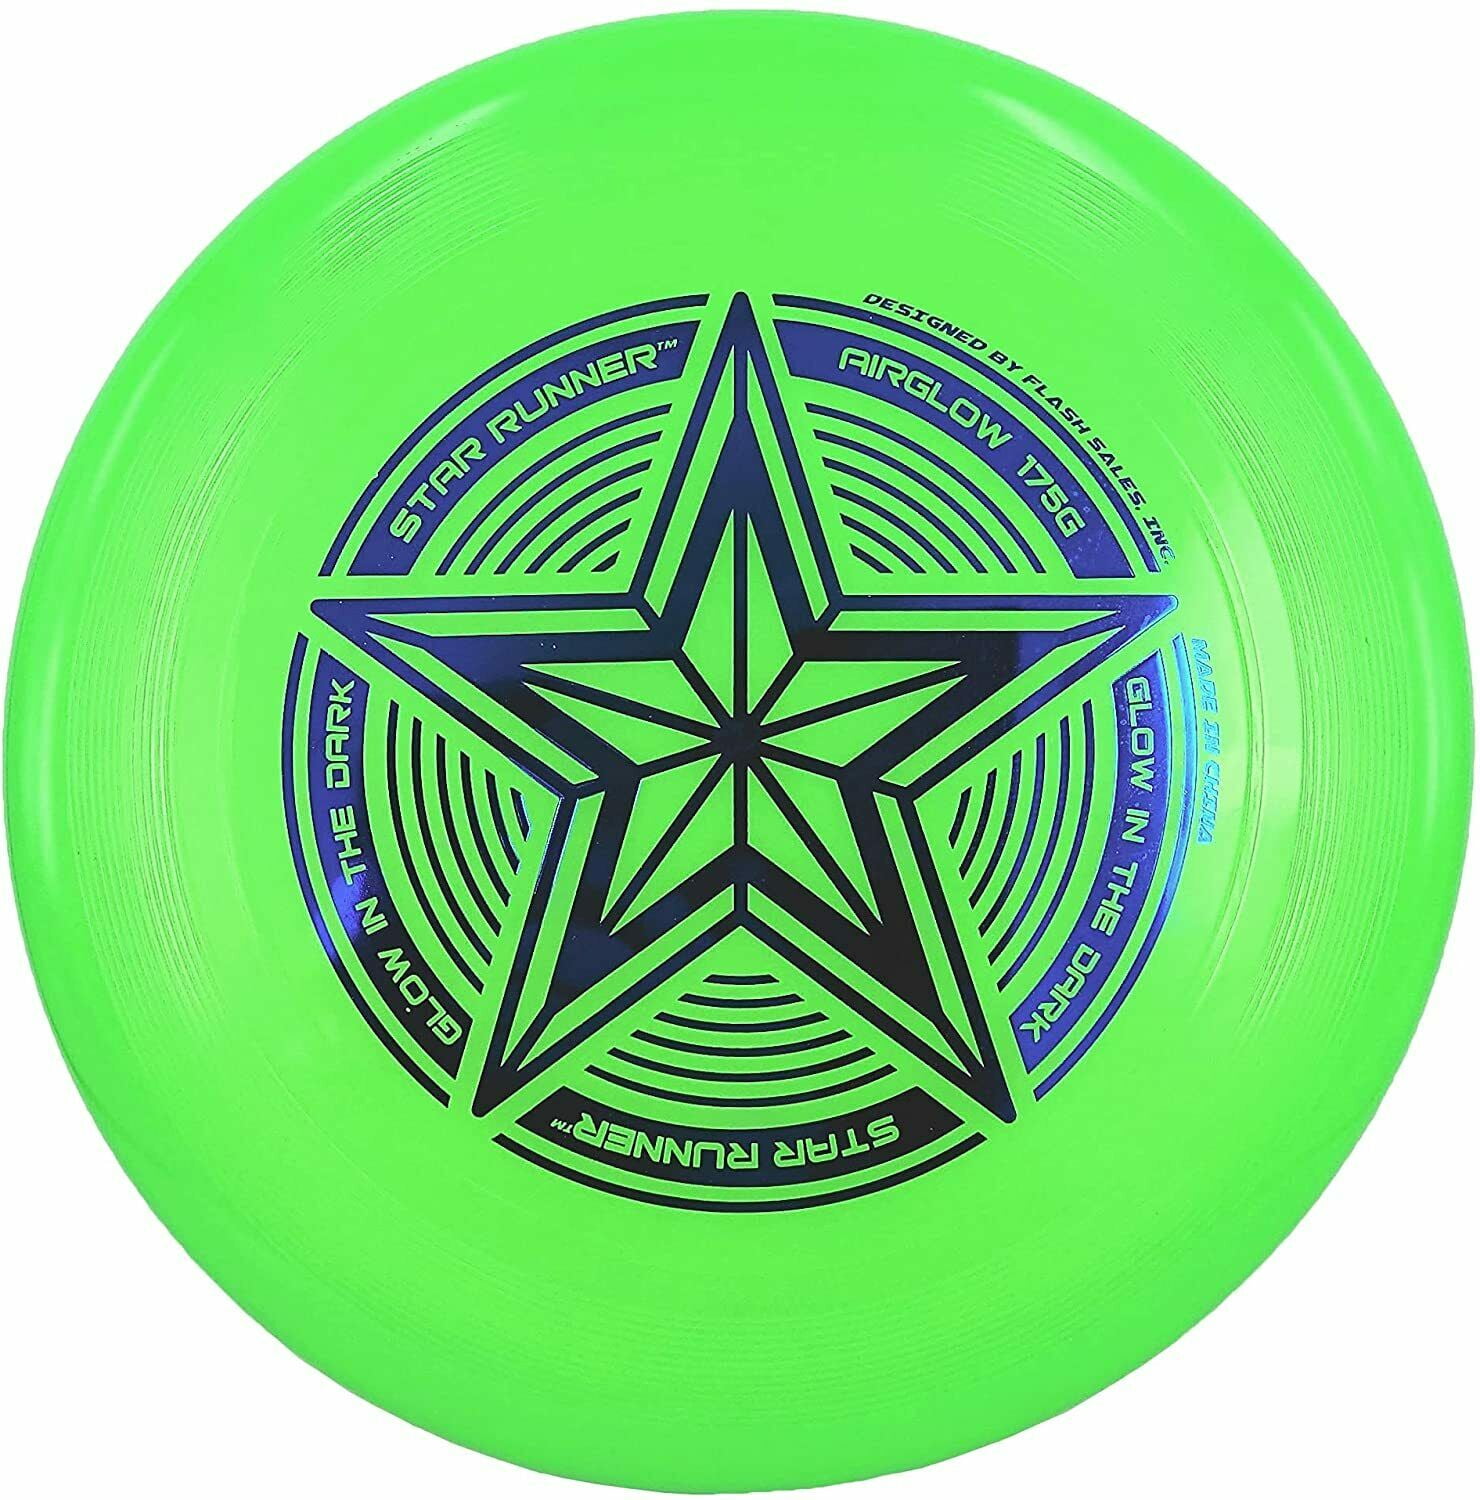 Zip Chip Mini Frisbee Gravity Disc Flying Fun Outdoors Fitness Game Kids Play 